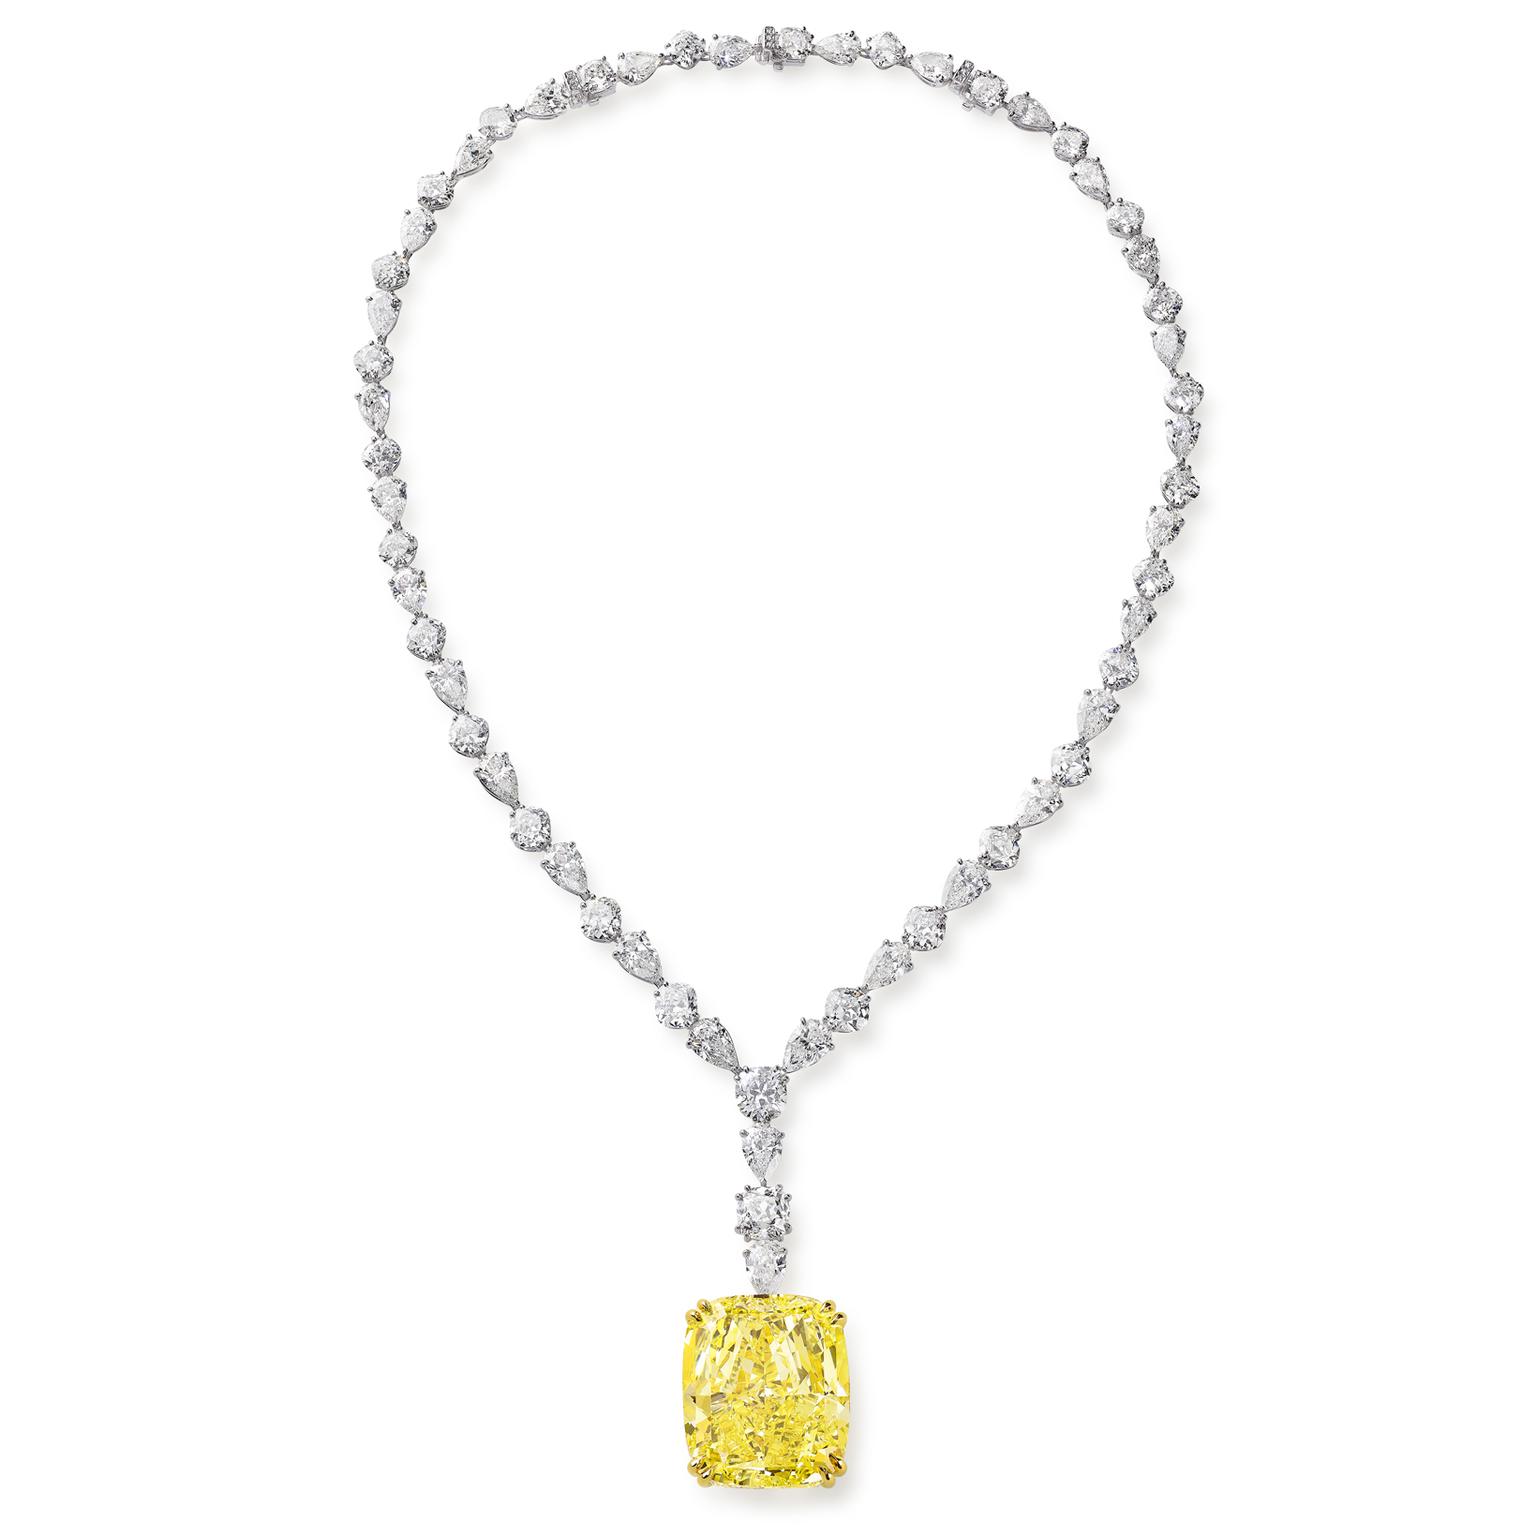 High Quality 2CT Brilliant Cut Yellow Diamond Necklace, S925 Silver Plated  18k White Gold Chain. Gift for Her - Etsy